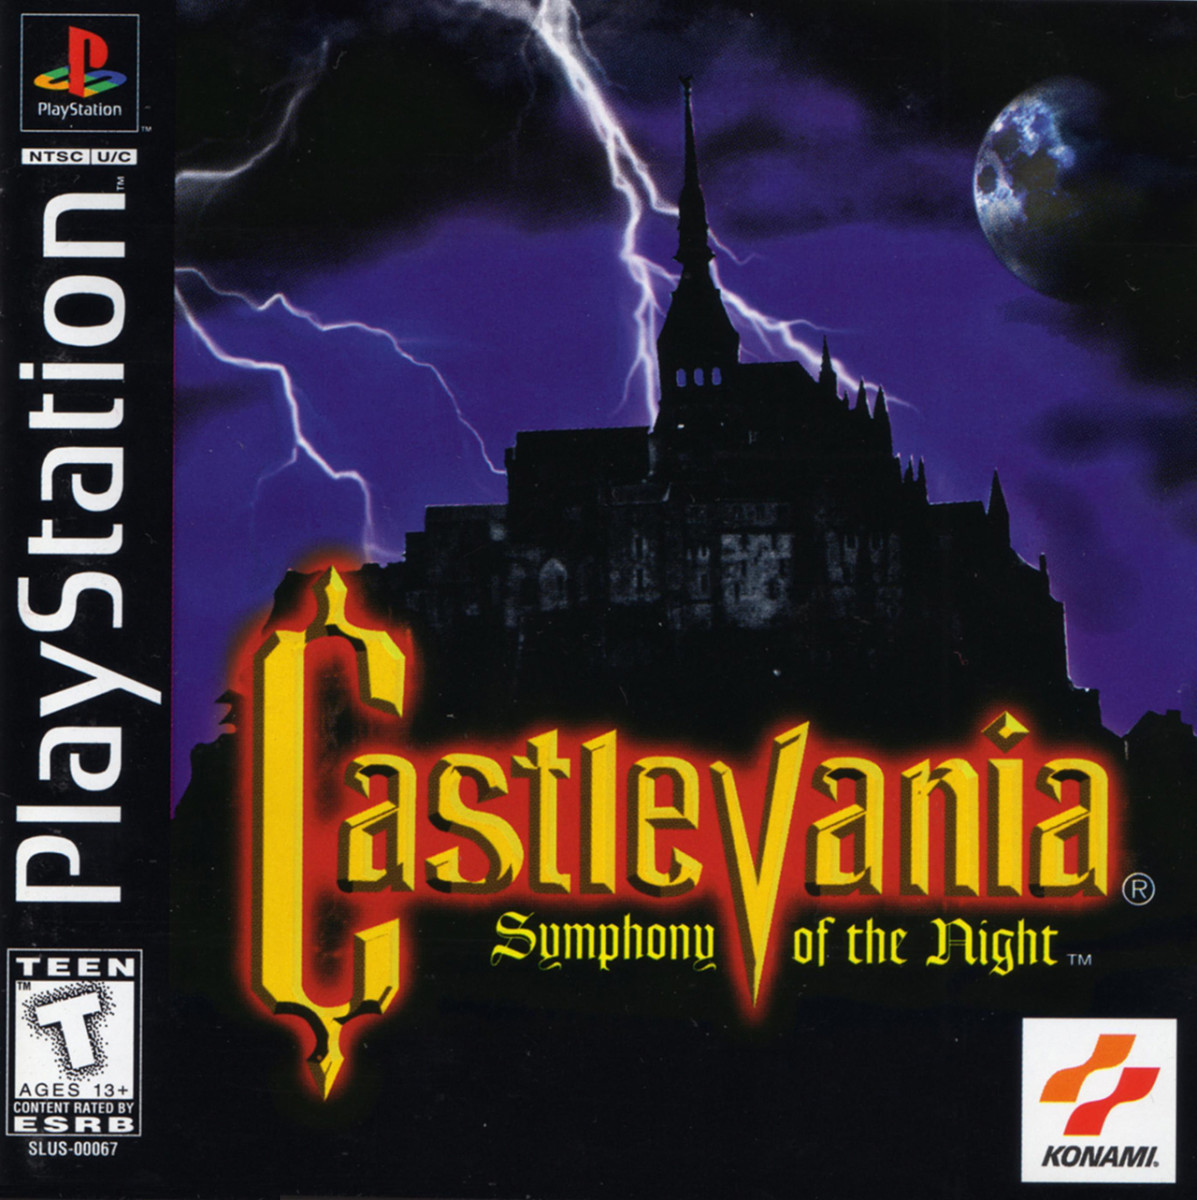 "Castlevania" fans would remember this cover very fondly.